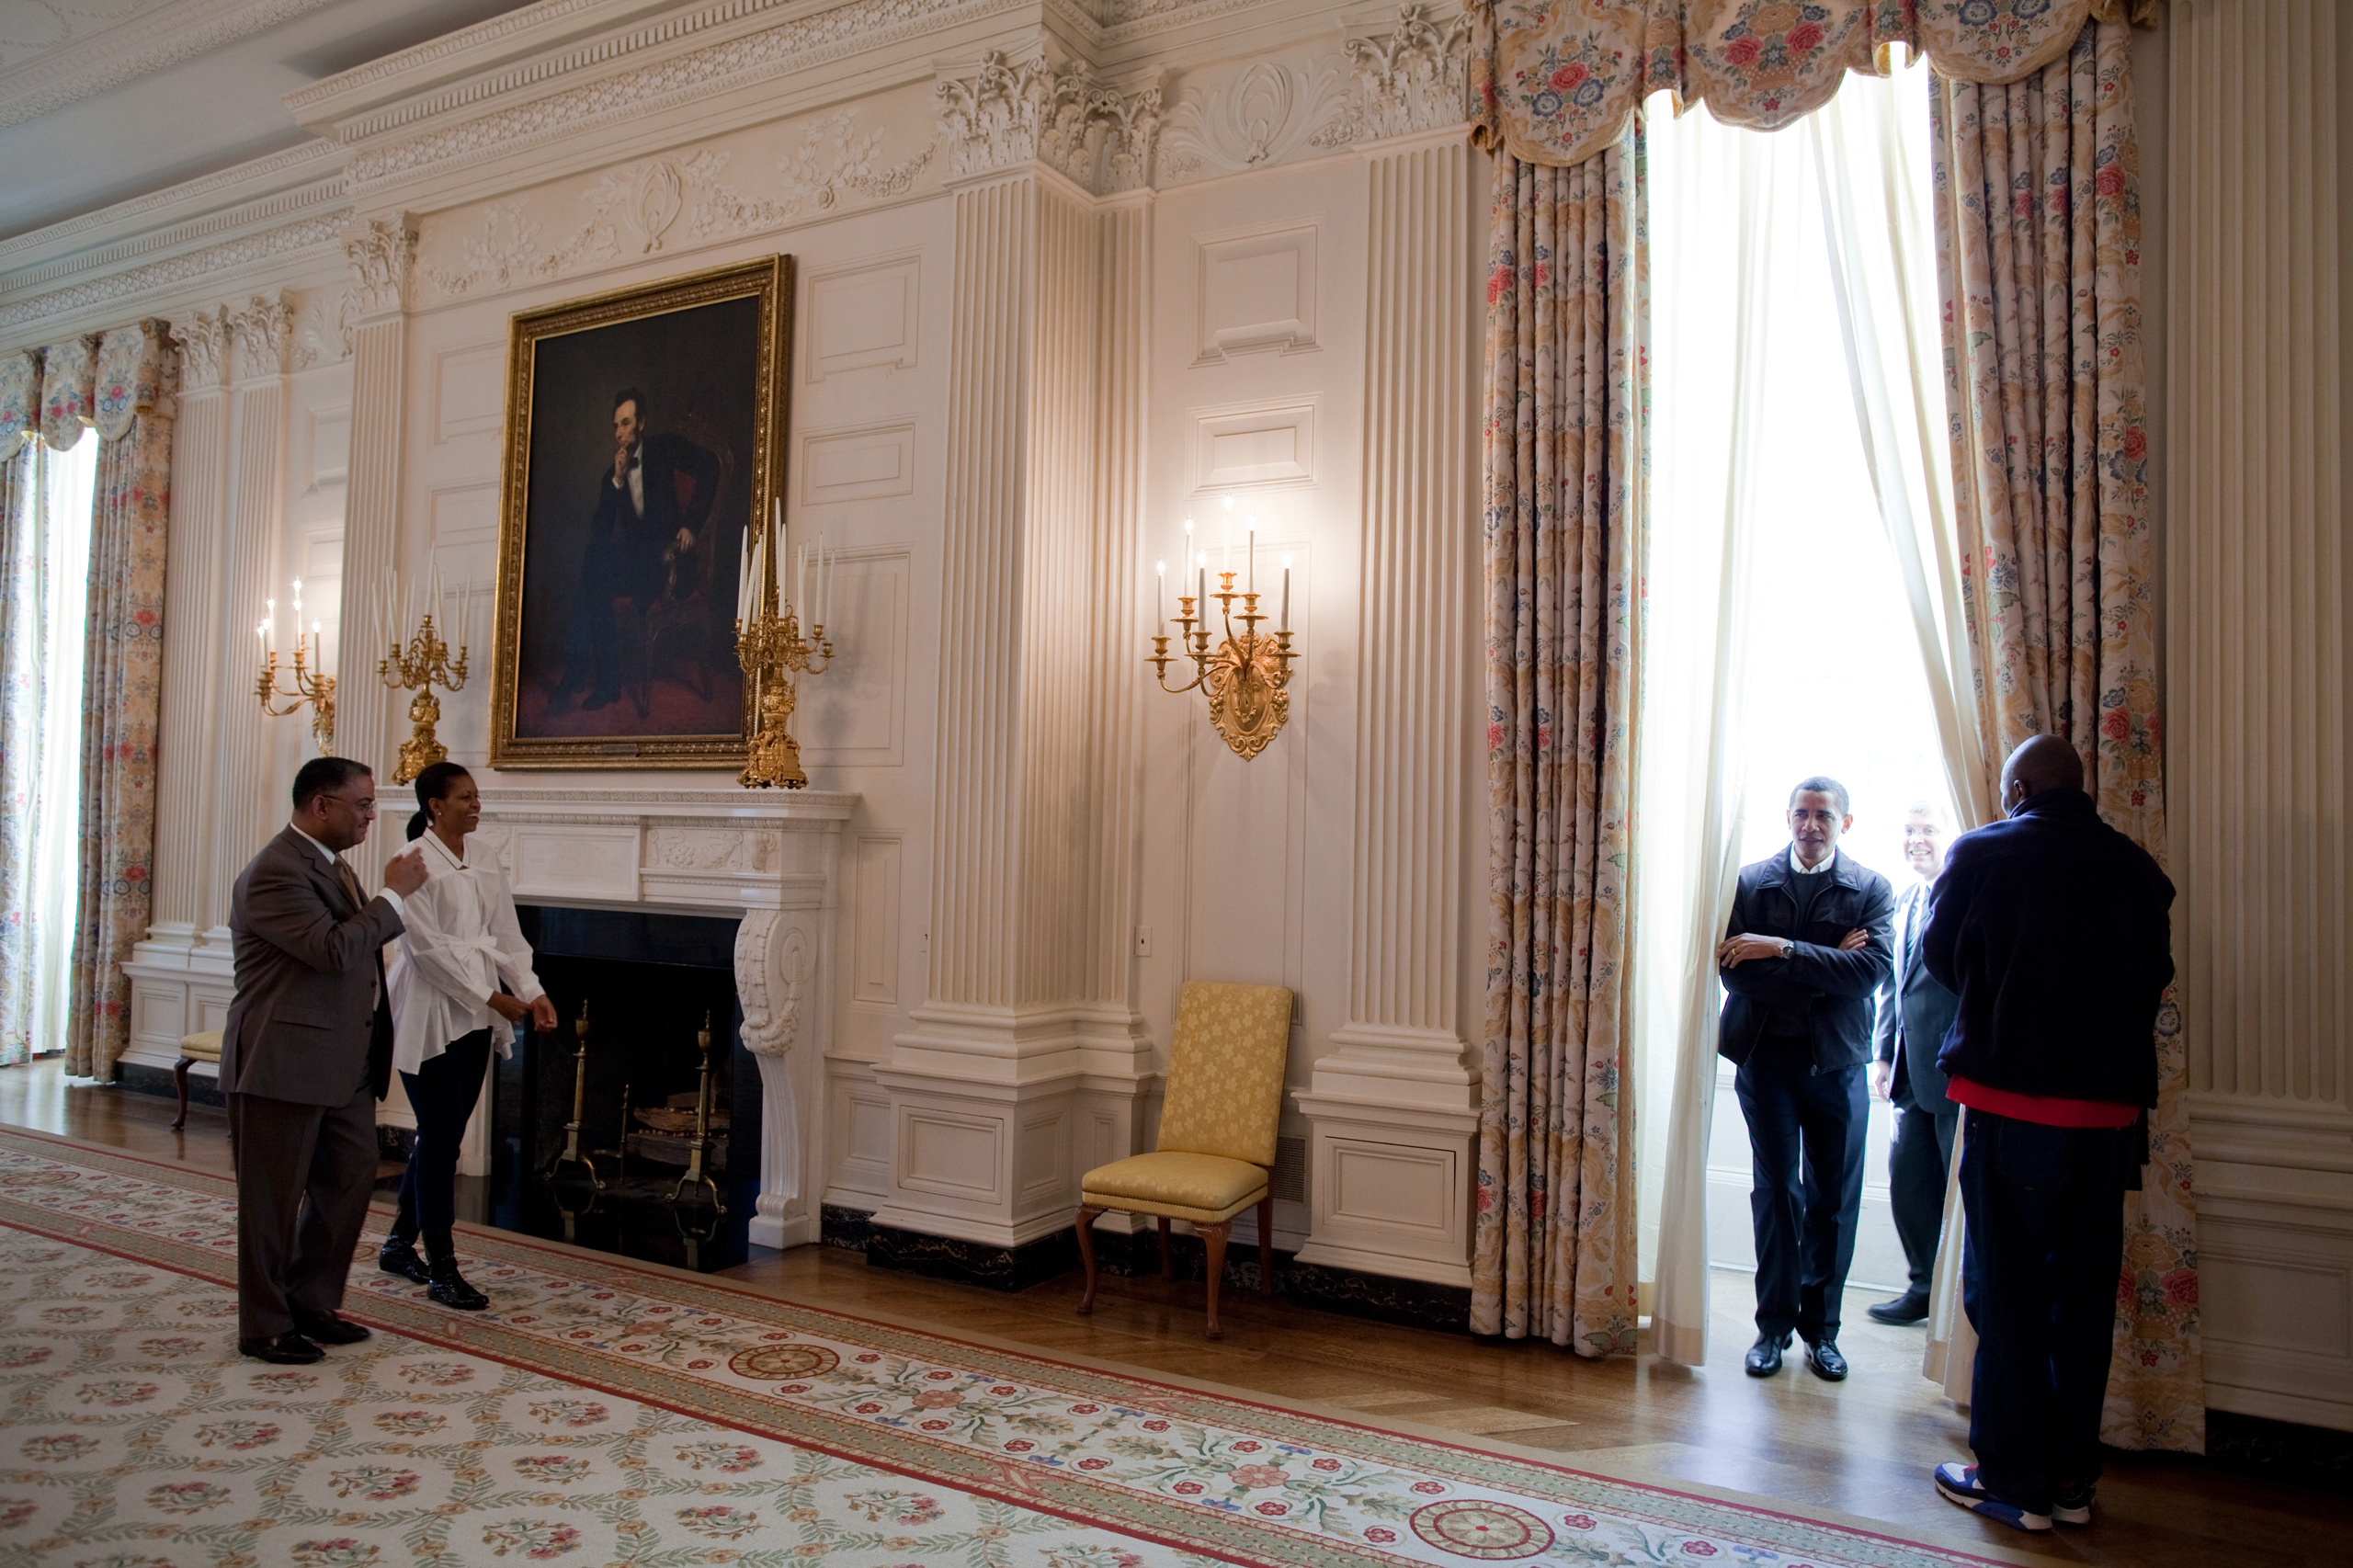 President Barack Obama and First Lady Michelle Obama tour the State Dining Room with White House Chief Usher Admiral Stephen  Steve  Rochon, left; Curator William  Bill  Allman and Personal Aide Reggie Love, right, on Jan. 24, 2009.